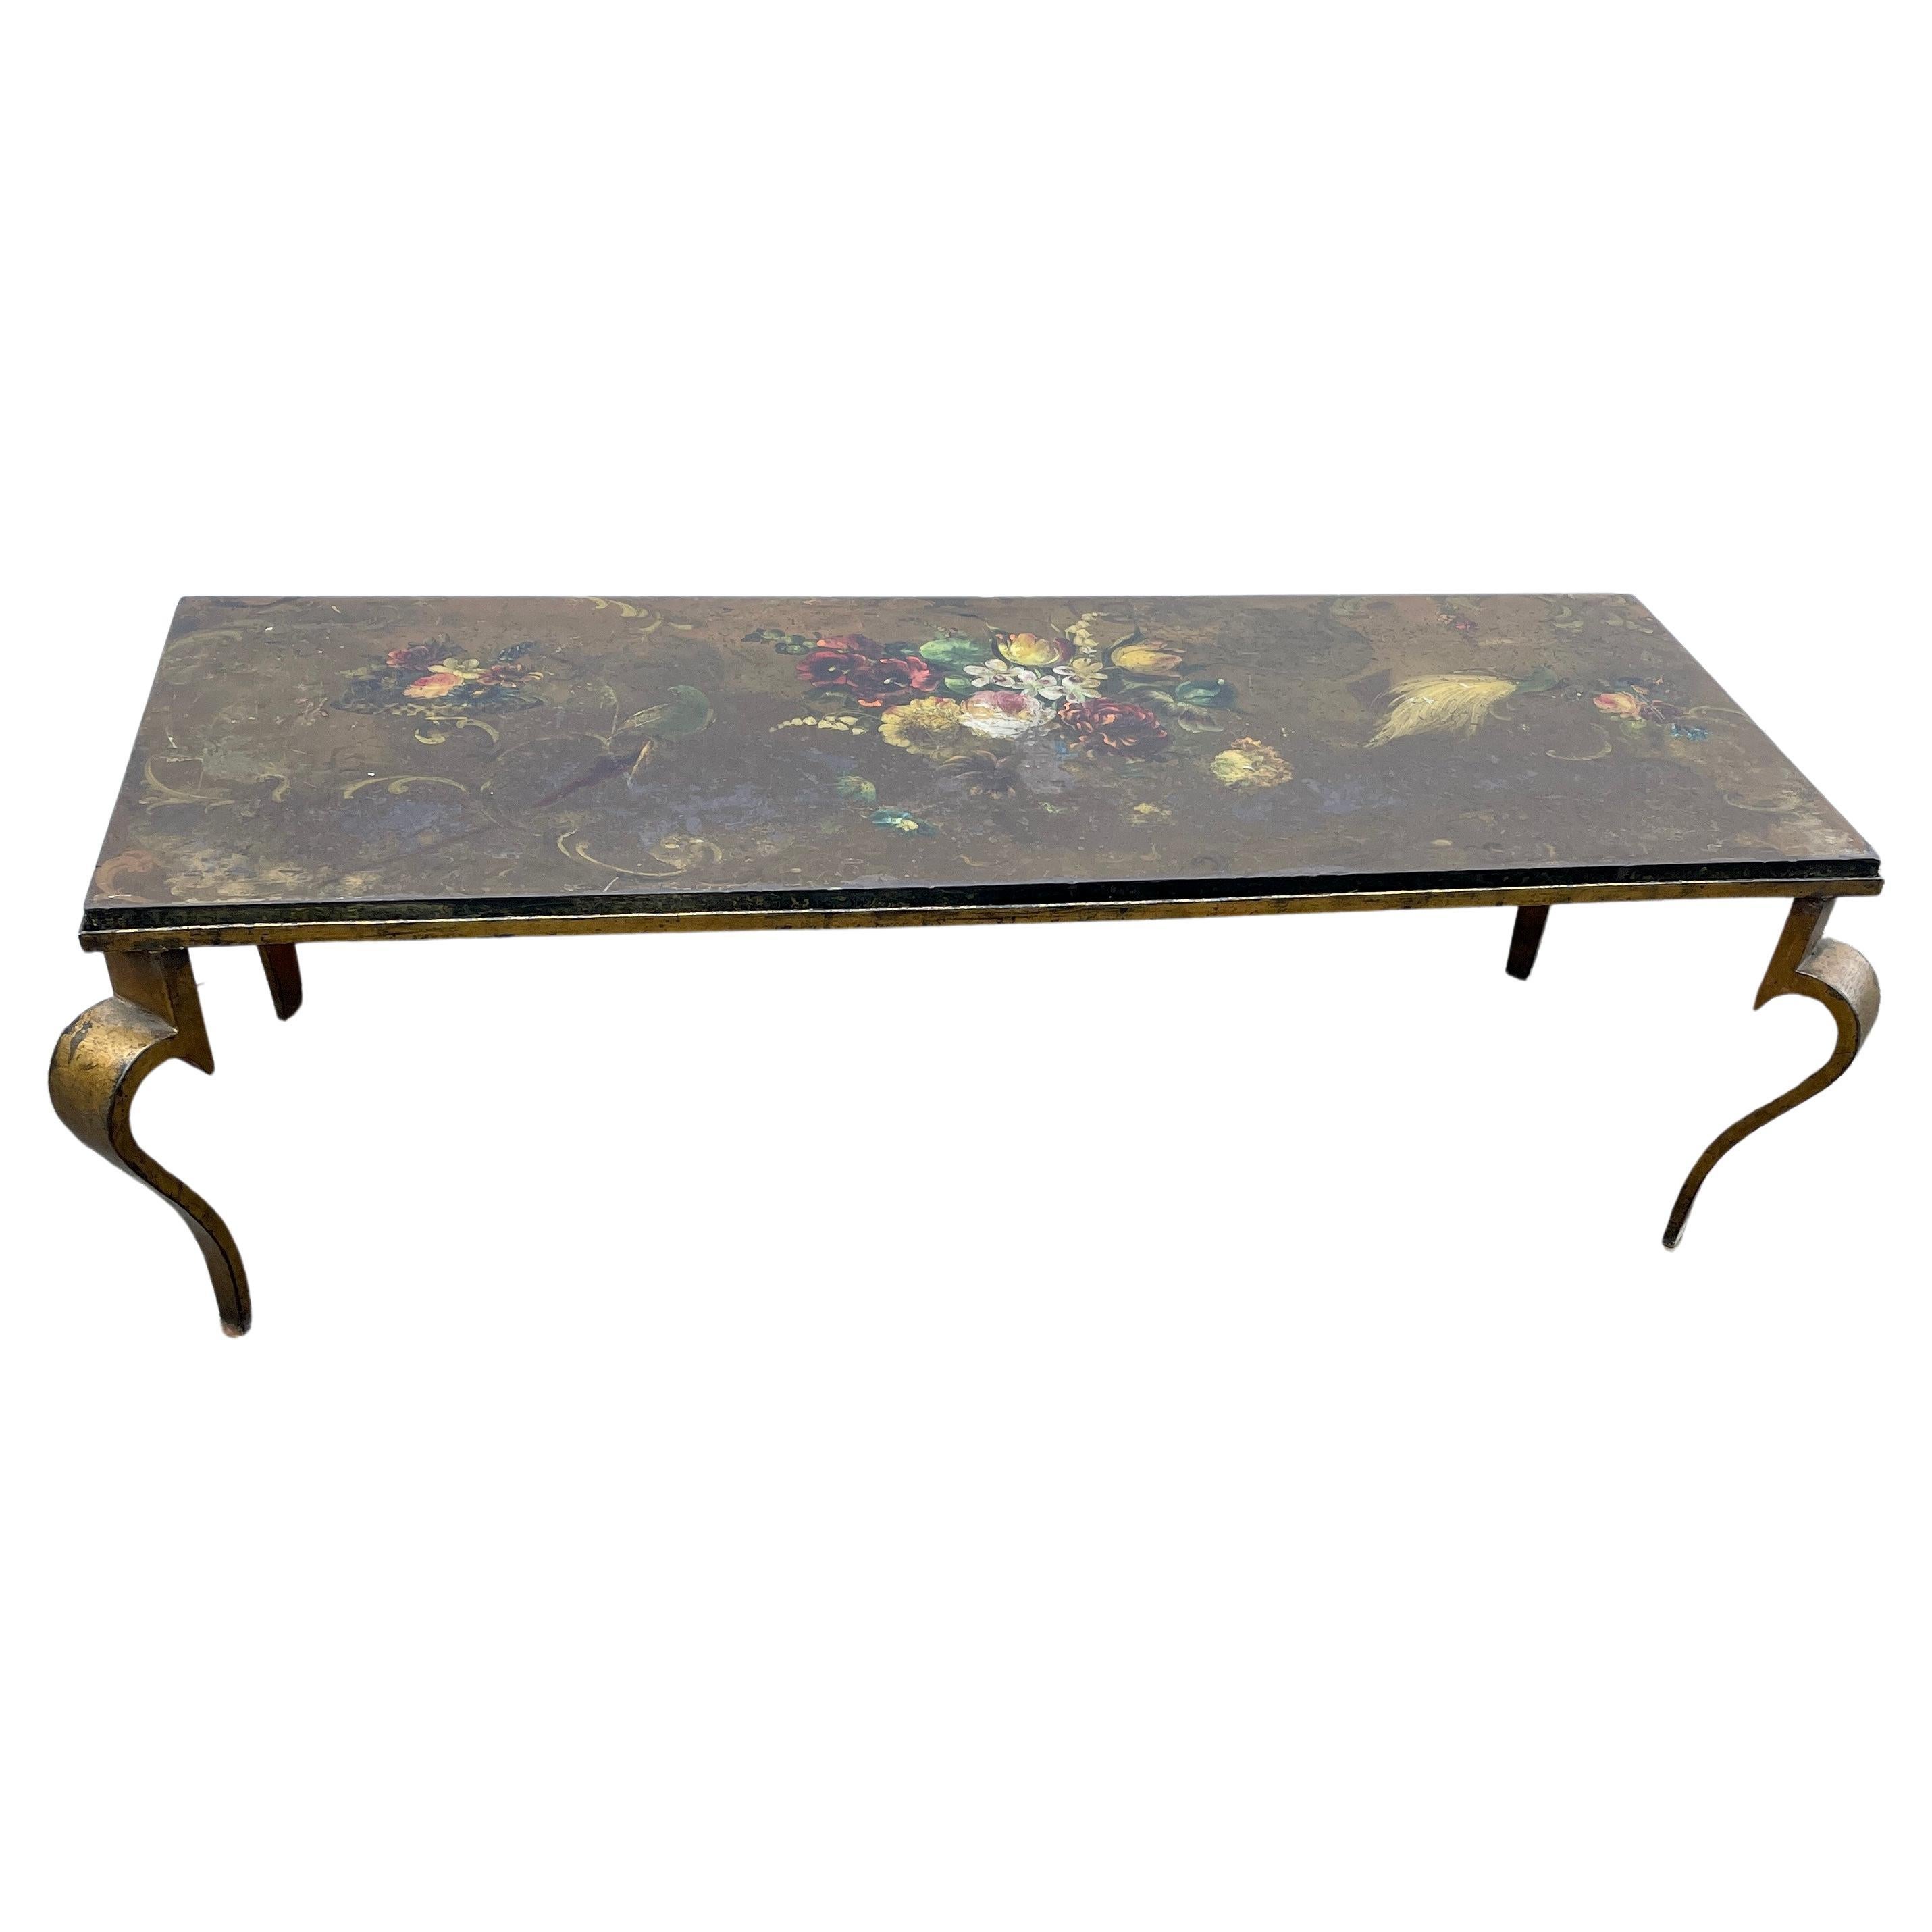 Vintage Italian Hand-painted Rectangular Cocktail Table, Circa 1950 For Sale